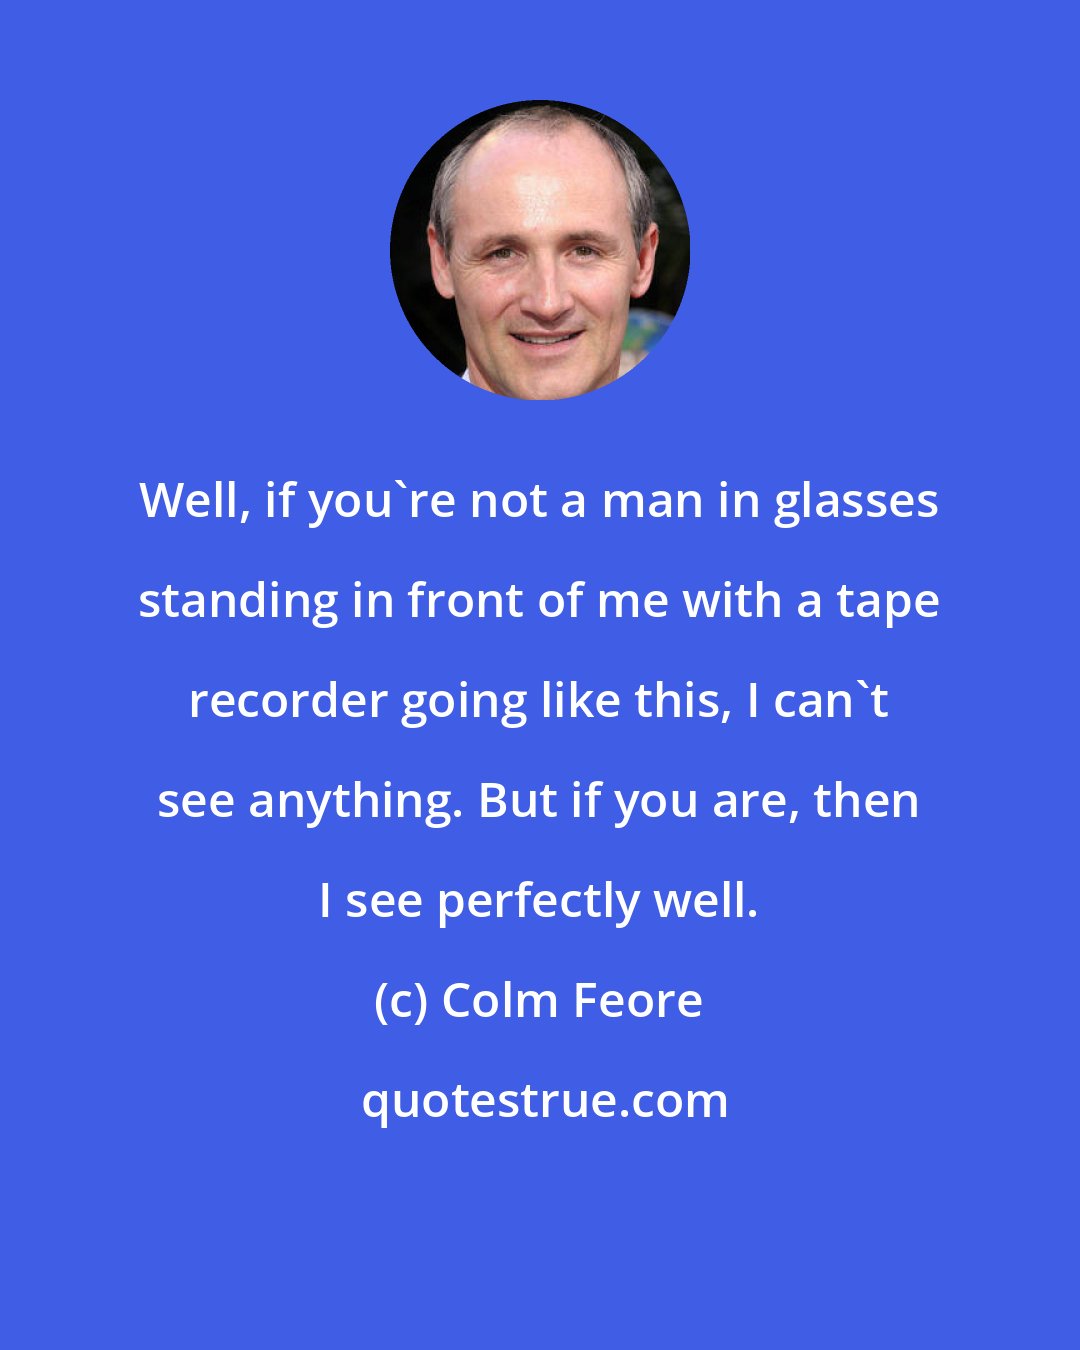 Colm Feore: Well, if you're not a man in glasses standing in front of me with a tape recorder going like this, I can't see anything. But if you are, then I see perfectly well.